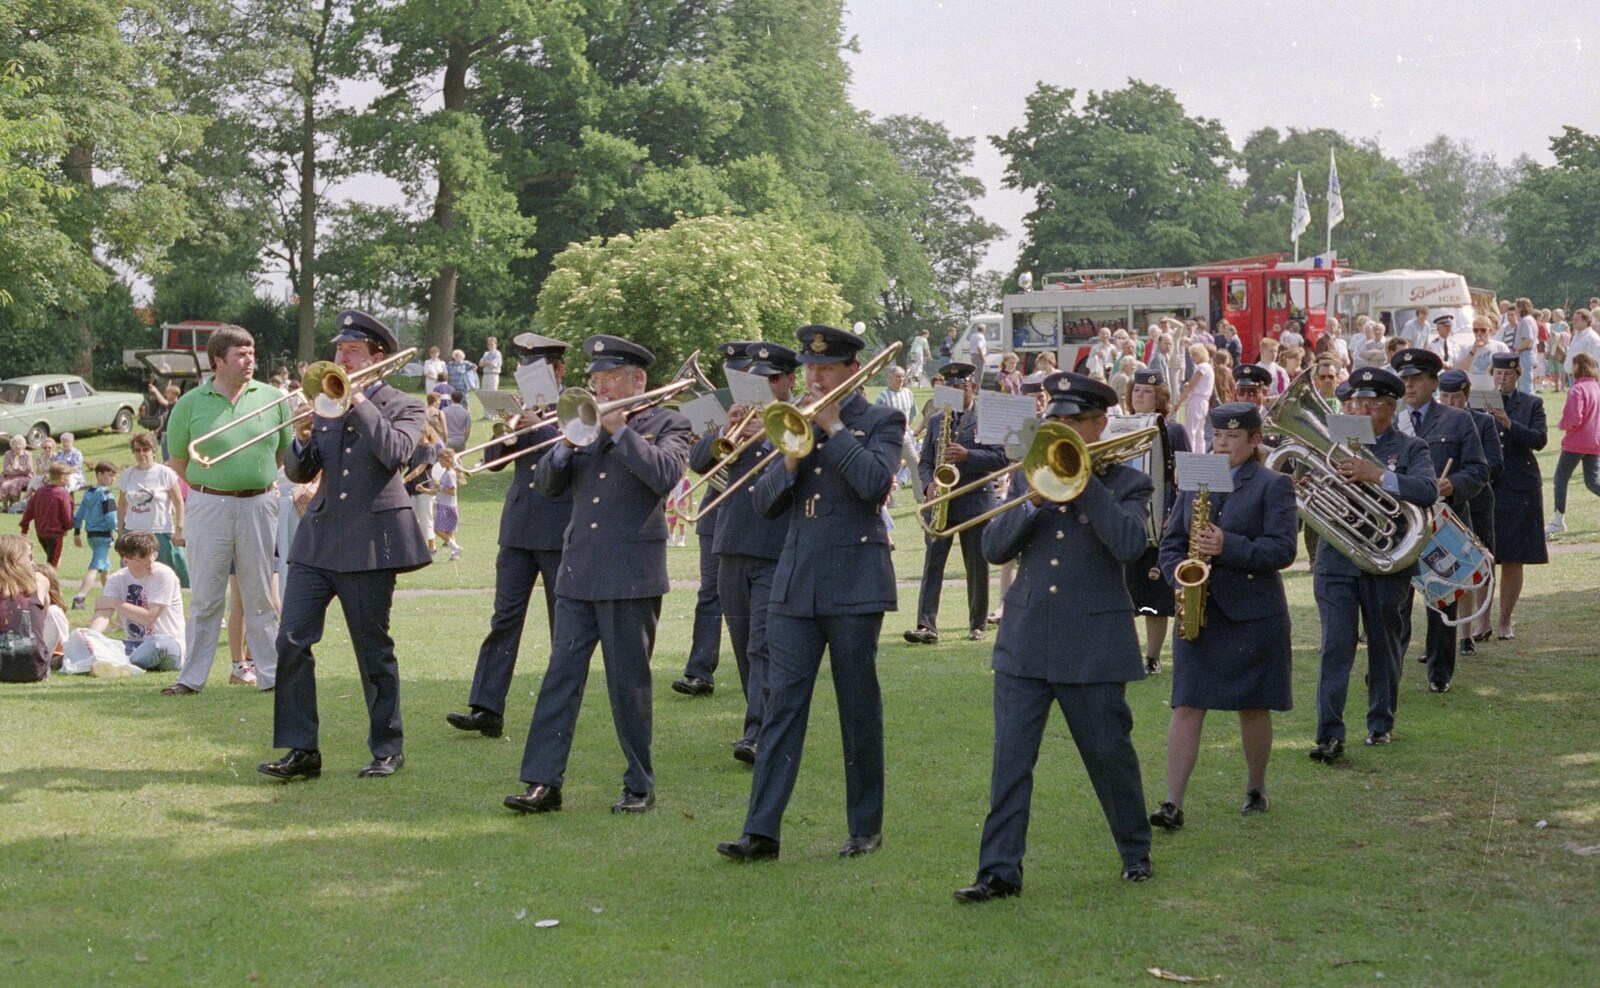 The RAF band marches around the park from A Raft Race on the Mere, Diss, Norfolk - 2nd June 1990